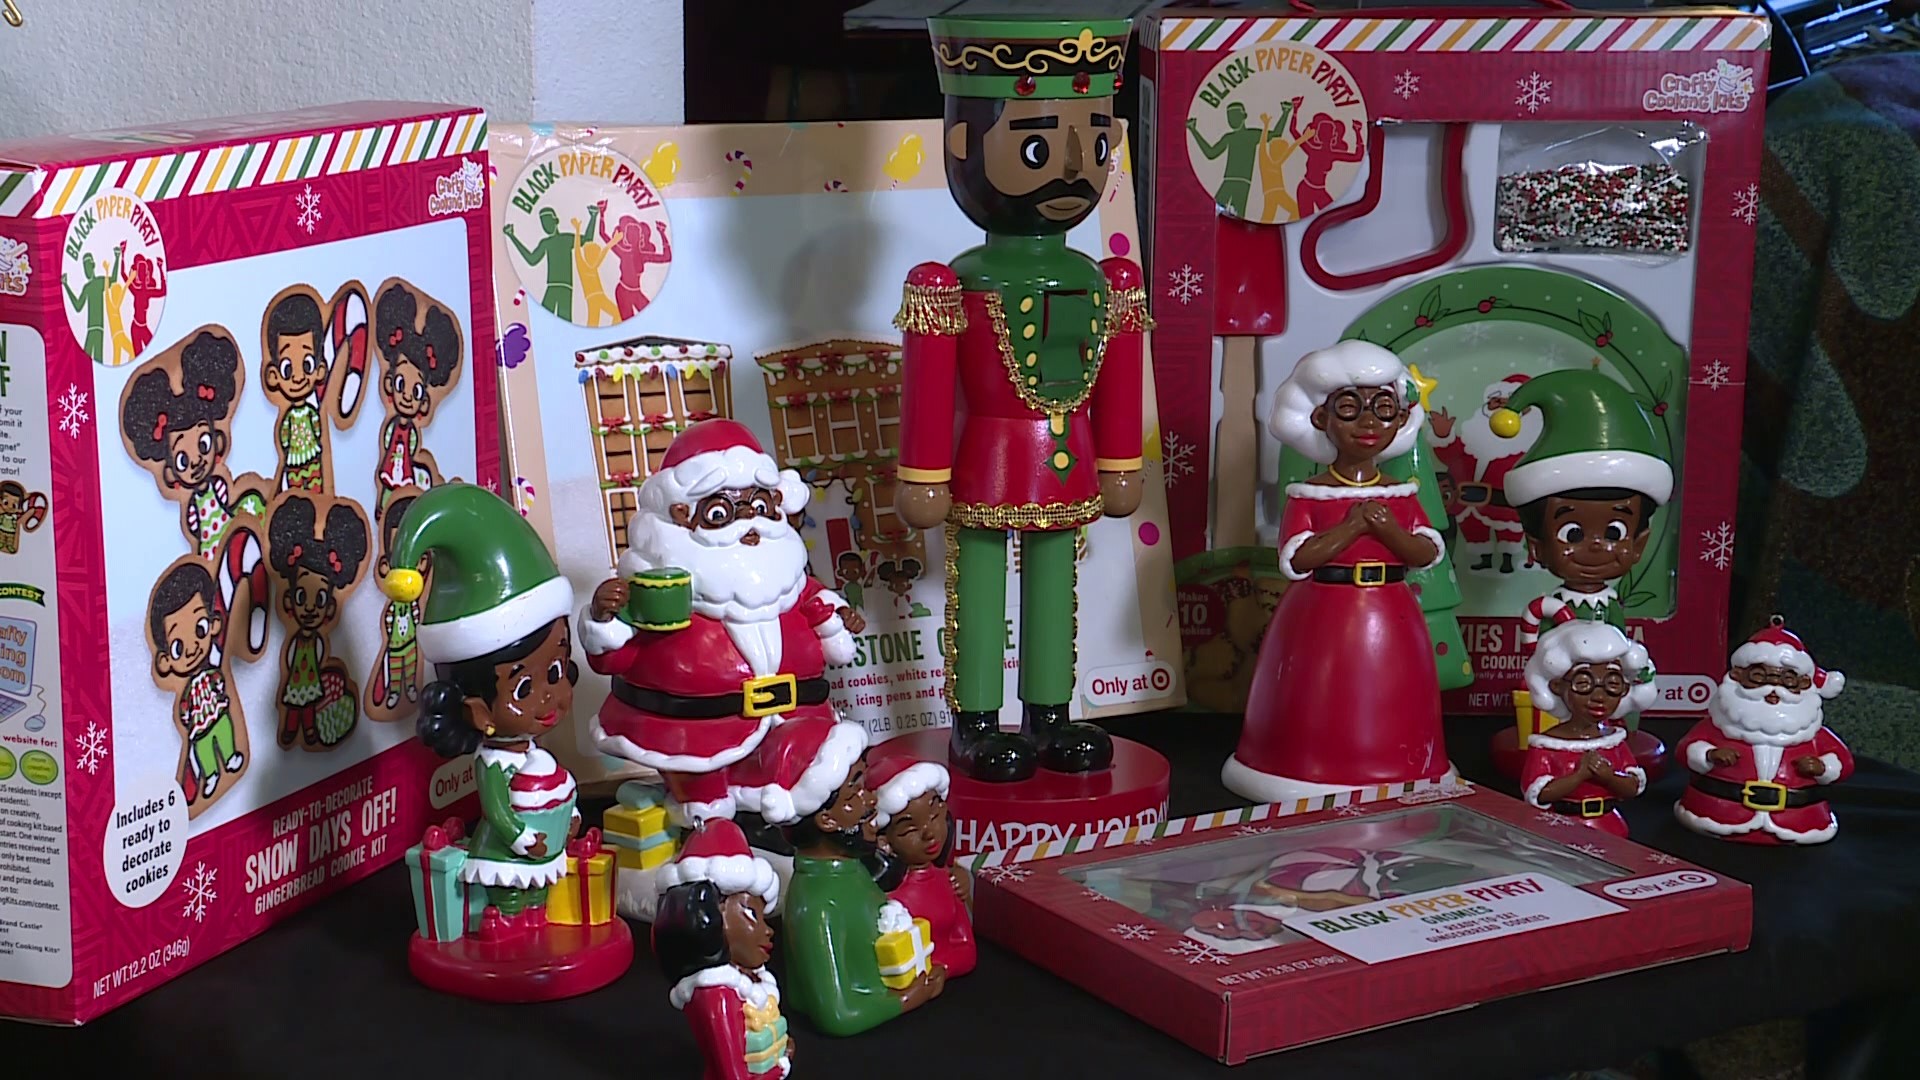 A local business is making headlines nationwide with its unique brand known for holiday-themed items such as black Santas and black gnomes